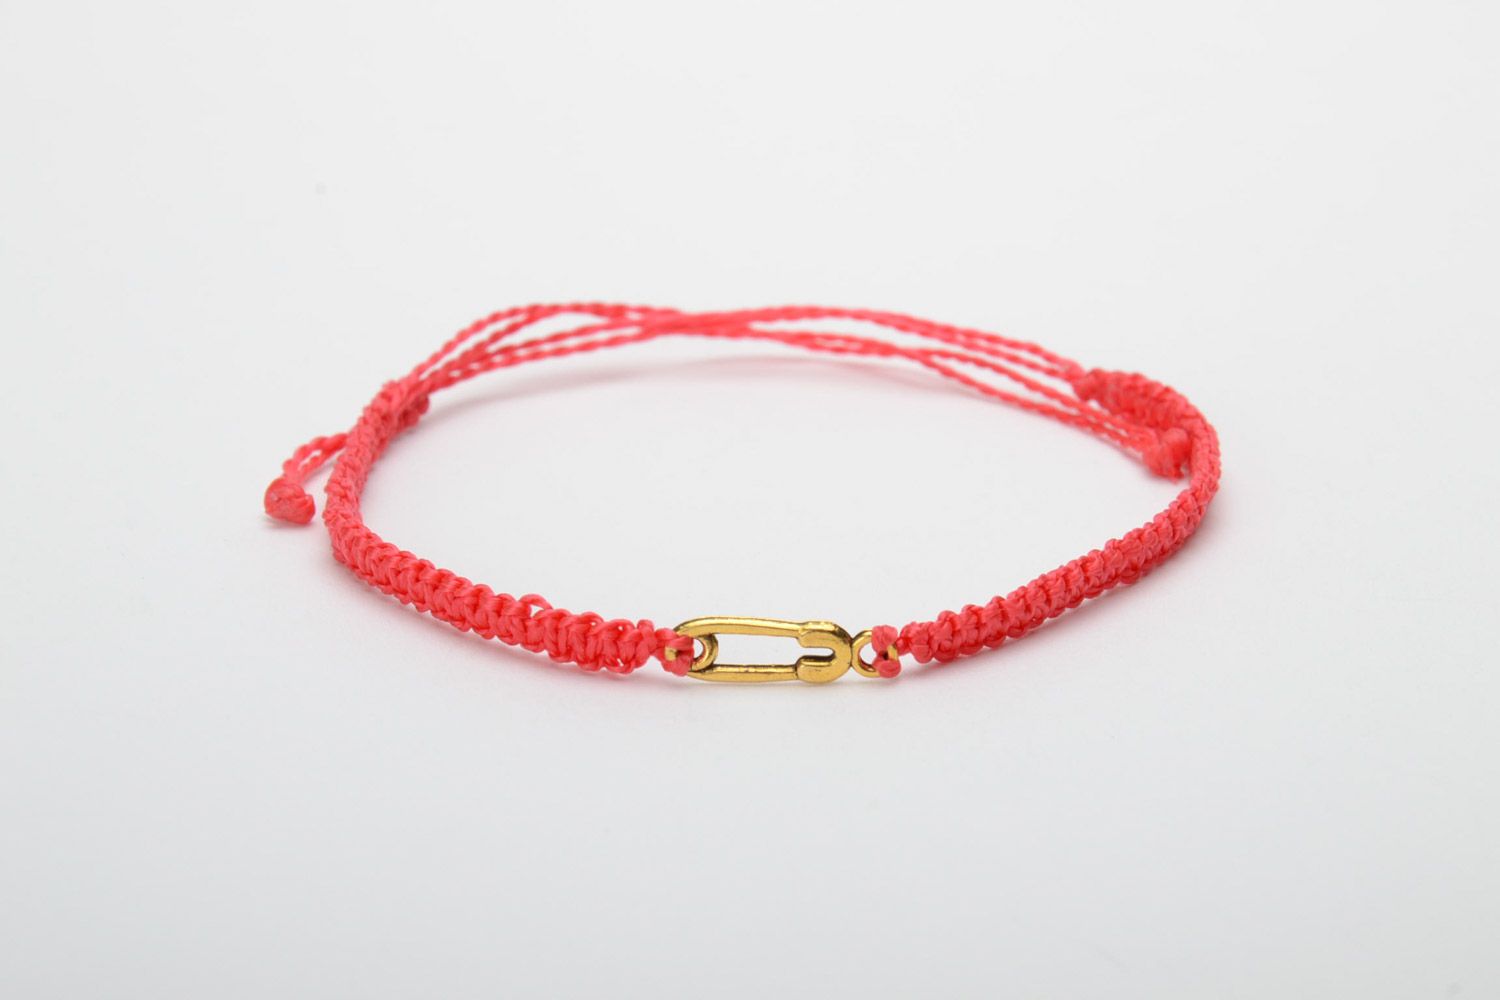 Handmade women's woven thread bracelet of red color with metal pin charm photo 5